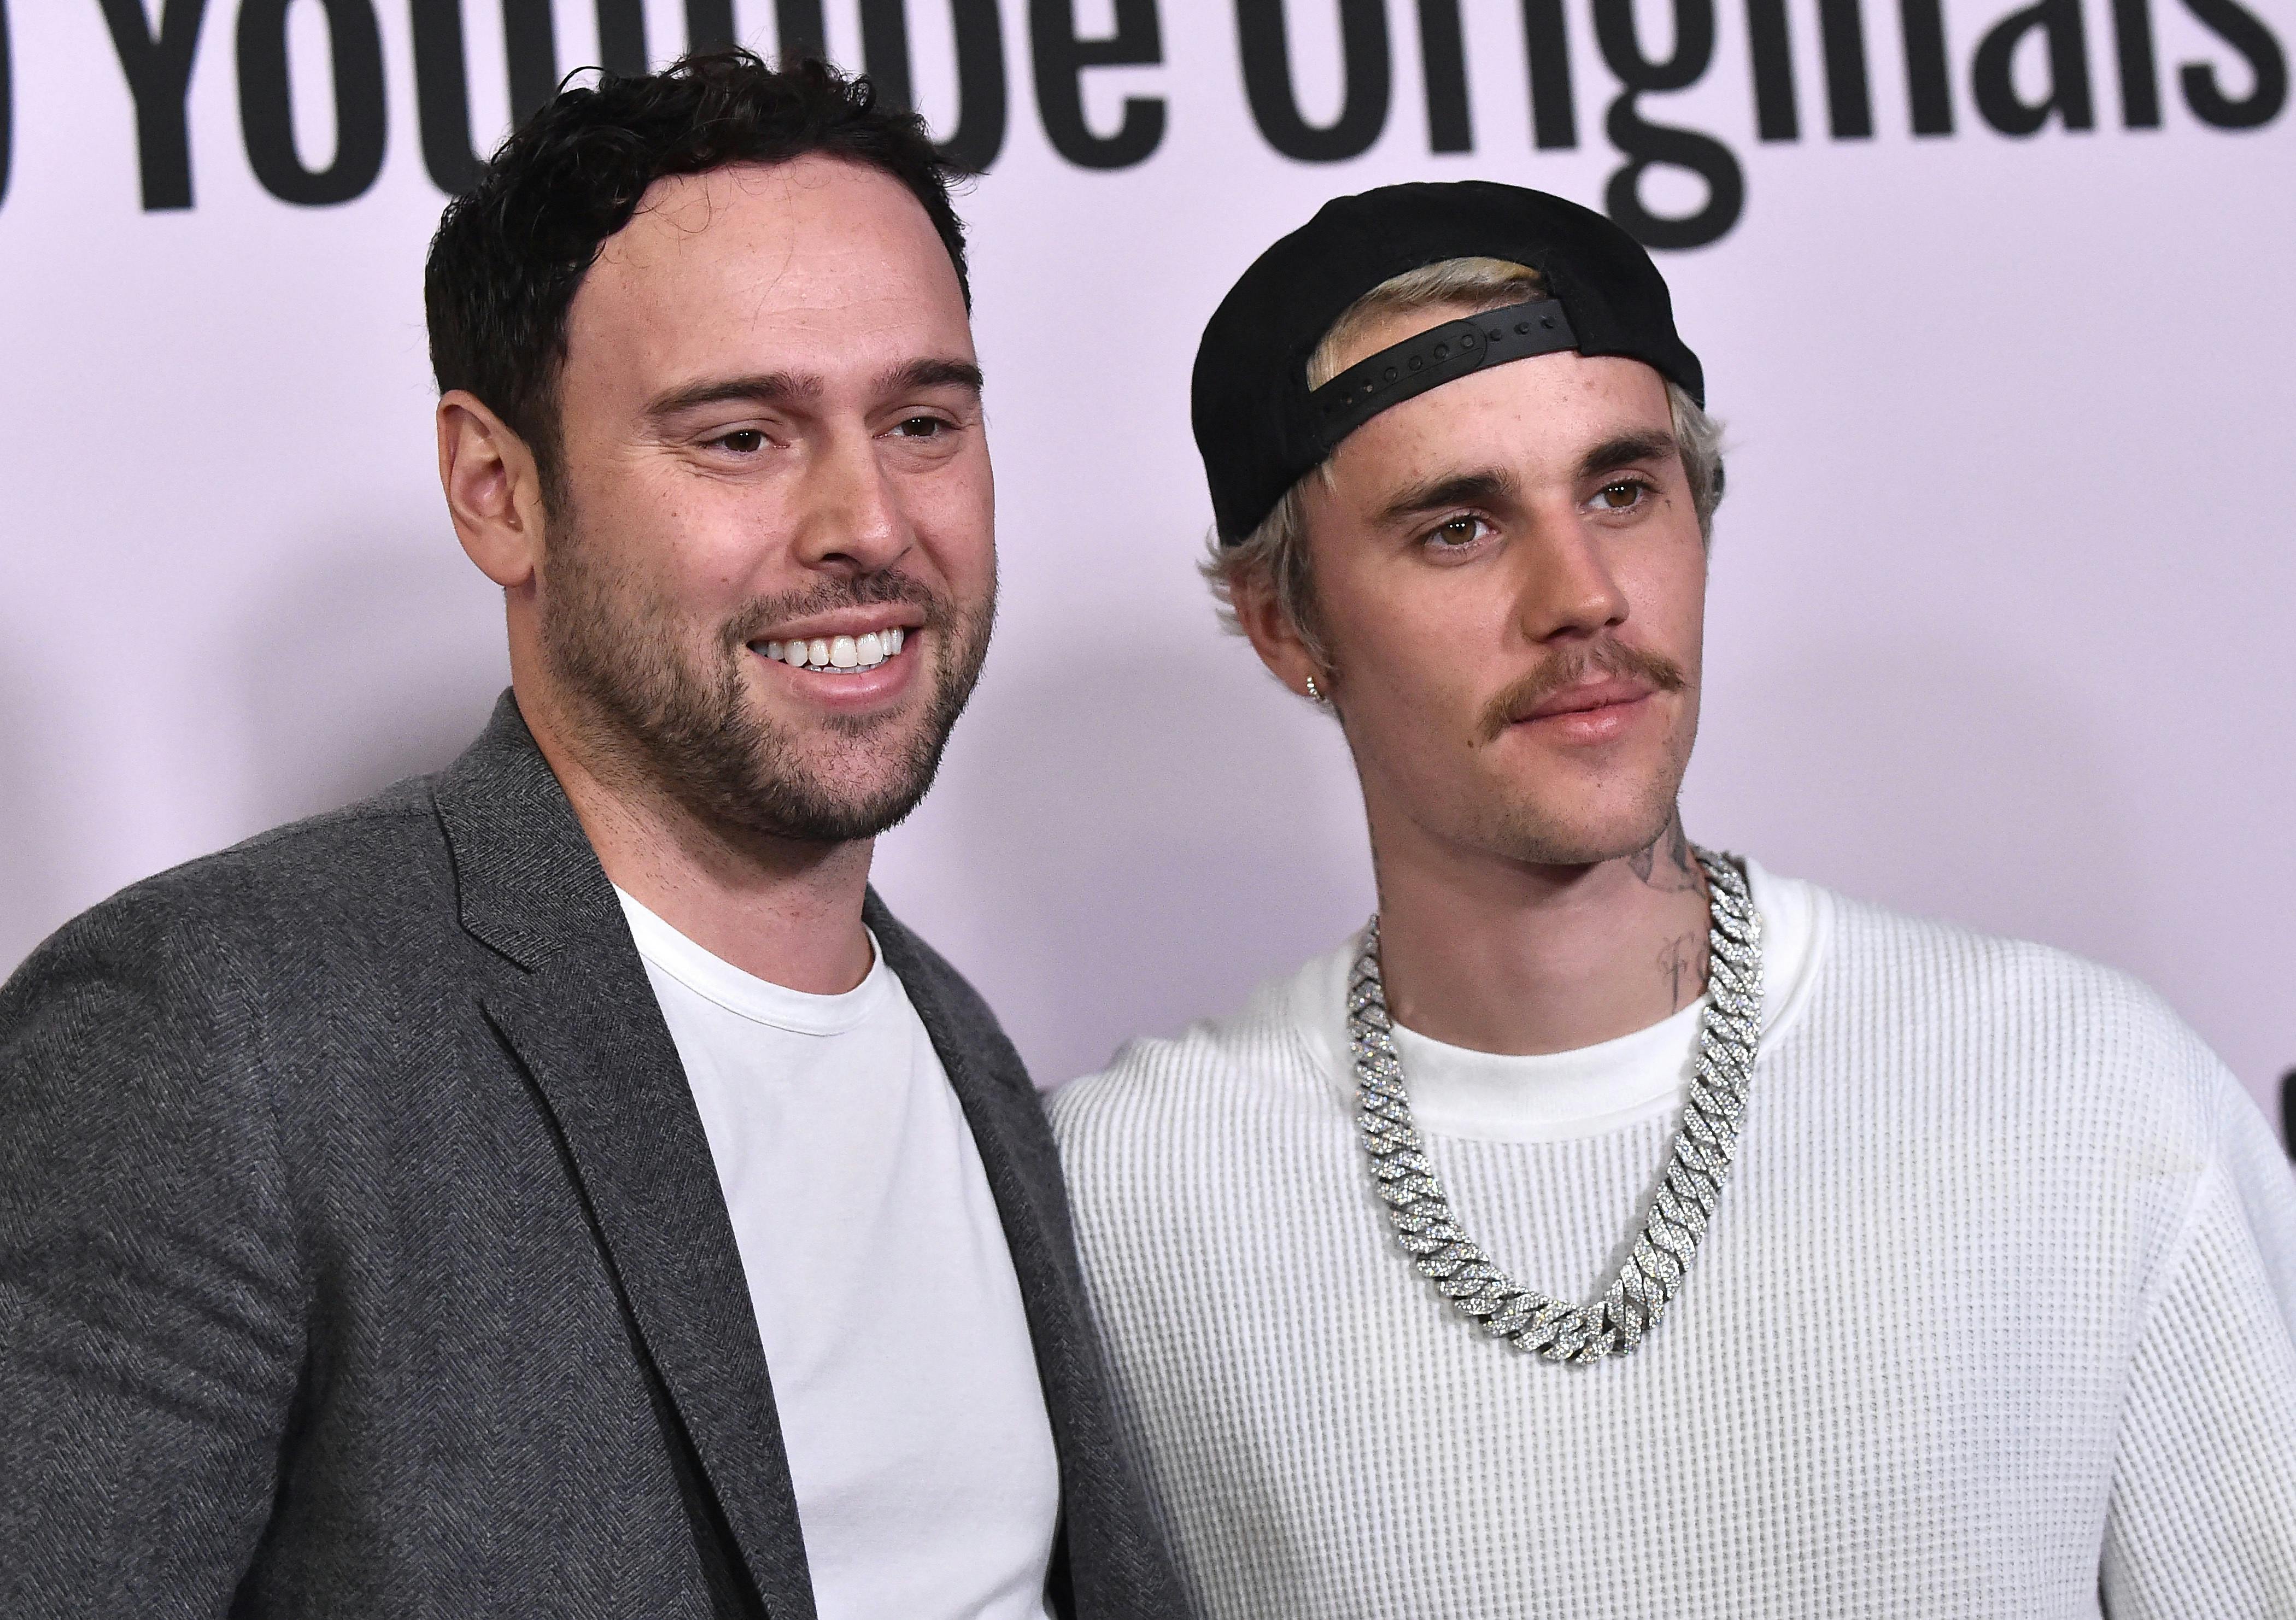 US businessman Scooter Braun (L) and Canadian singer Justin Bieber arrive for YouTube Originals' "Justin Bieber: Seasons" premiere at the Regency Bruin Theatre in Los Angeles on January 27, 2020.  LISA O'CONNOR / AFP